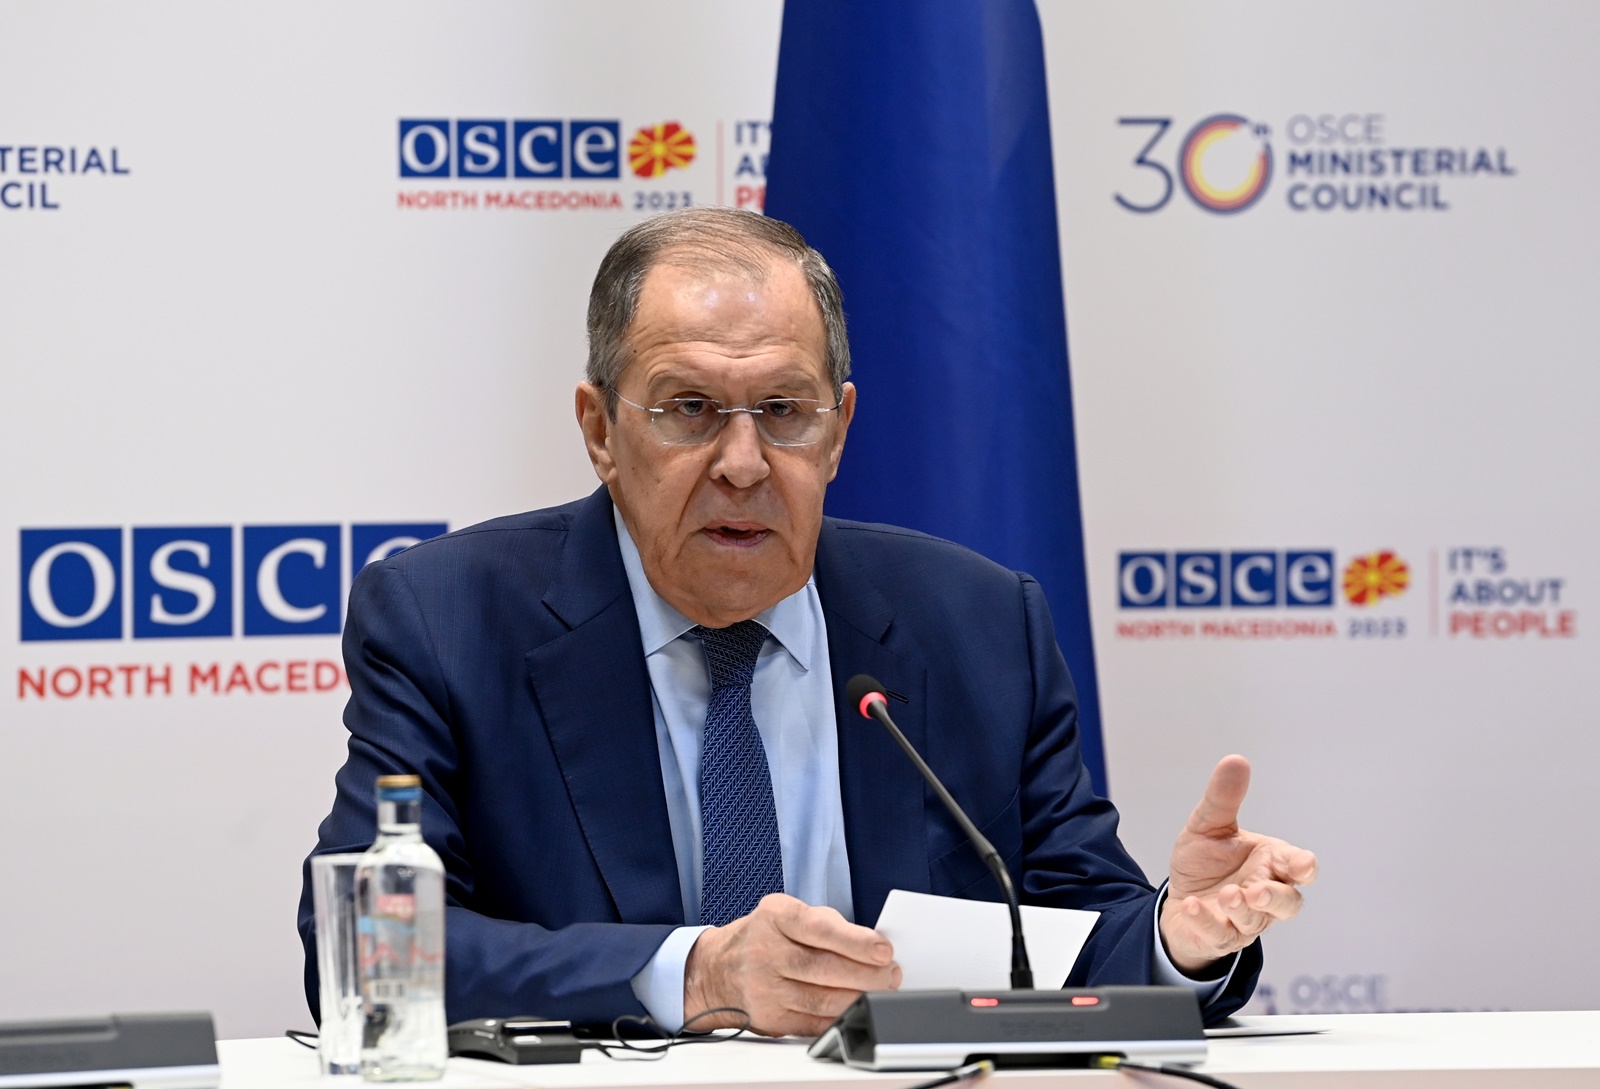 epa11005303 Russian Foreign Minister Sergei Lavrov speaks during a press conference on the sidelines of the 30th OSCE Ministerial Meeting in Skopje, Republic of North Macedonia, 01 December 2023. The Ministerial Council meets once a year towards the end of every term of chairmanship to consider issues on the OSCE agenda and adopt relevant documents. The 30th OSCE Ministerial Council takes place on 30 November and 01 December 2023.  EPA/GEORGI LICOVSKI